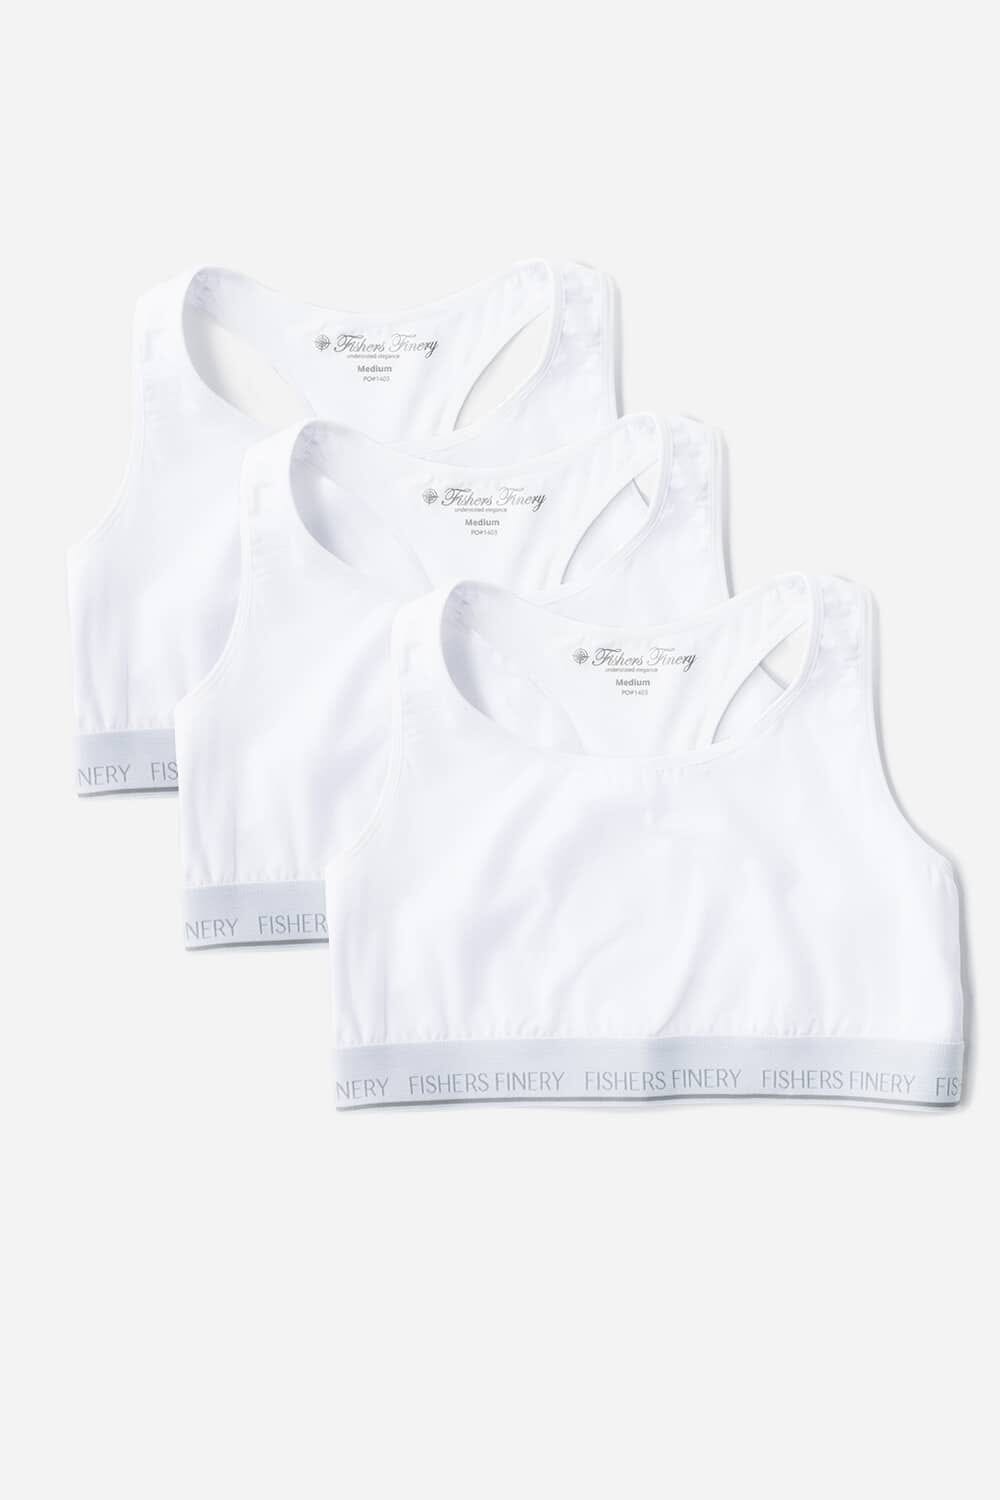 Women's Everyday Lightweight Racerback Bralette Womens>Casual>Bra Fishers Finery White X-Small 3 Pack